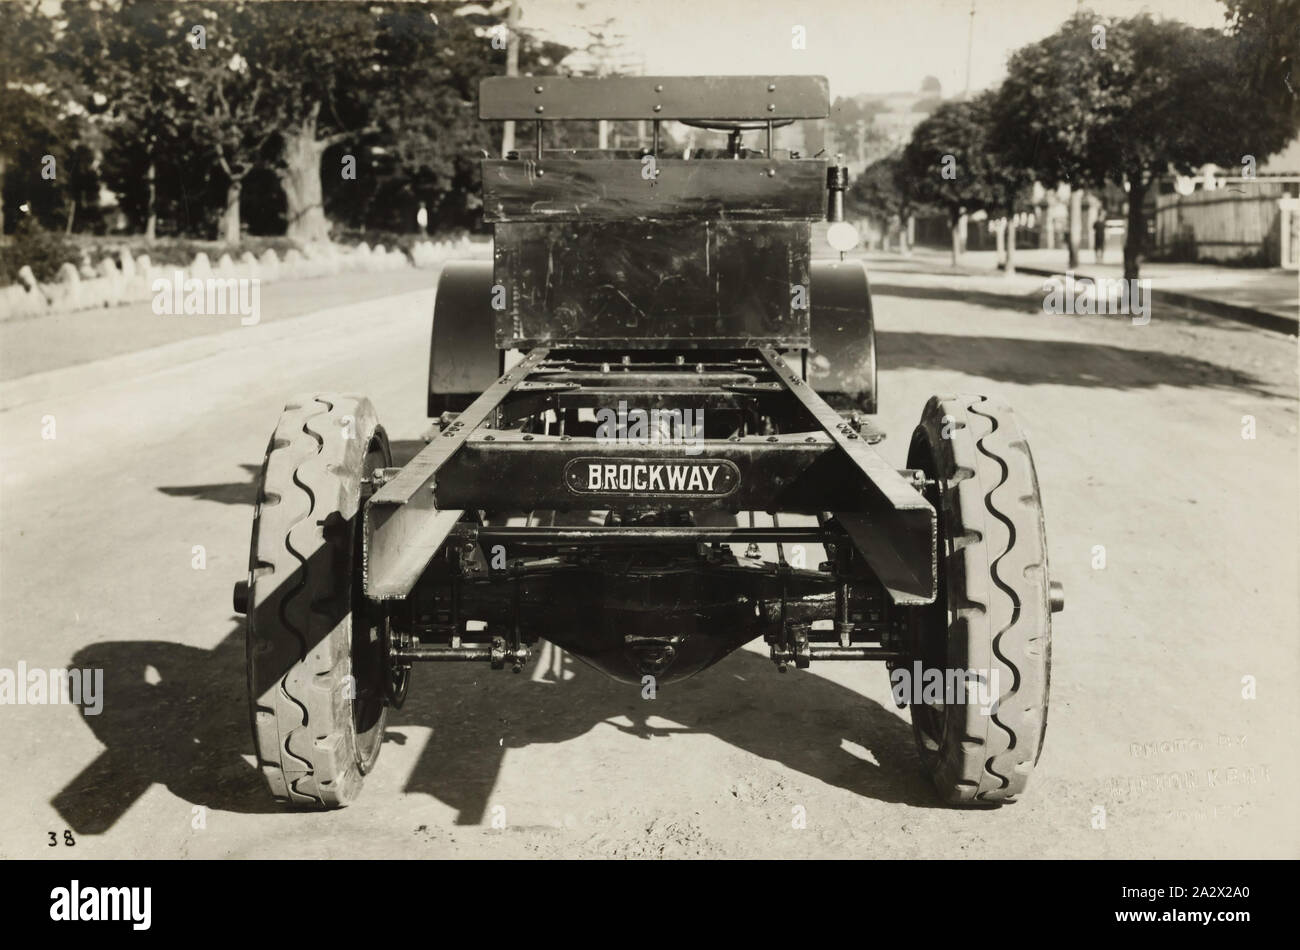 Photograph - Brockway Motors Ltd, Rear View of Brockway Truck, Sydney, New South Wales, circa 1927, Image from a photograph album containing twenty one photographs of motor trucks. The album was used by Brockway Motors Ltd Stock Photo